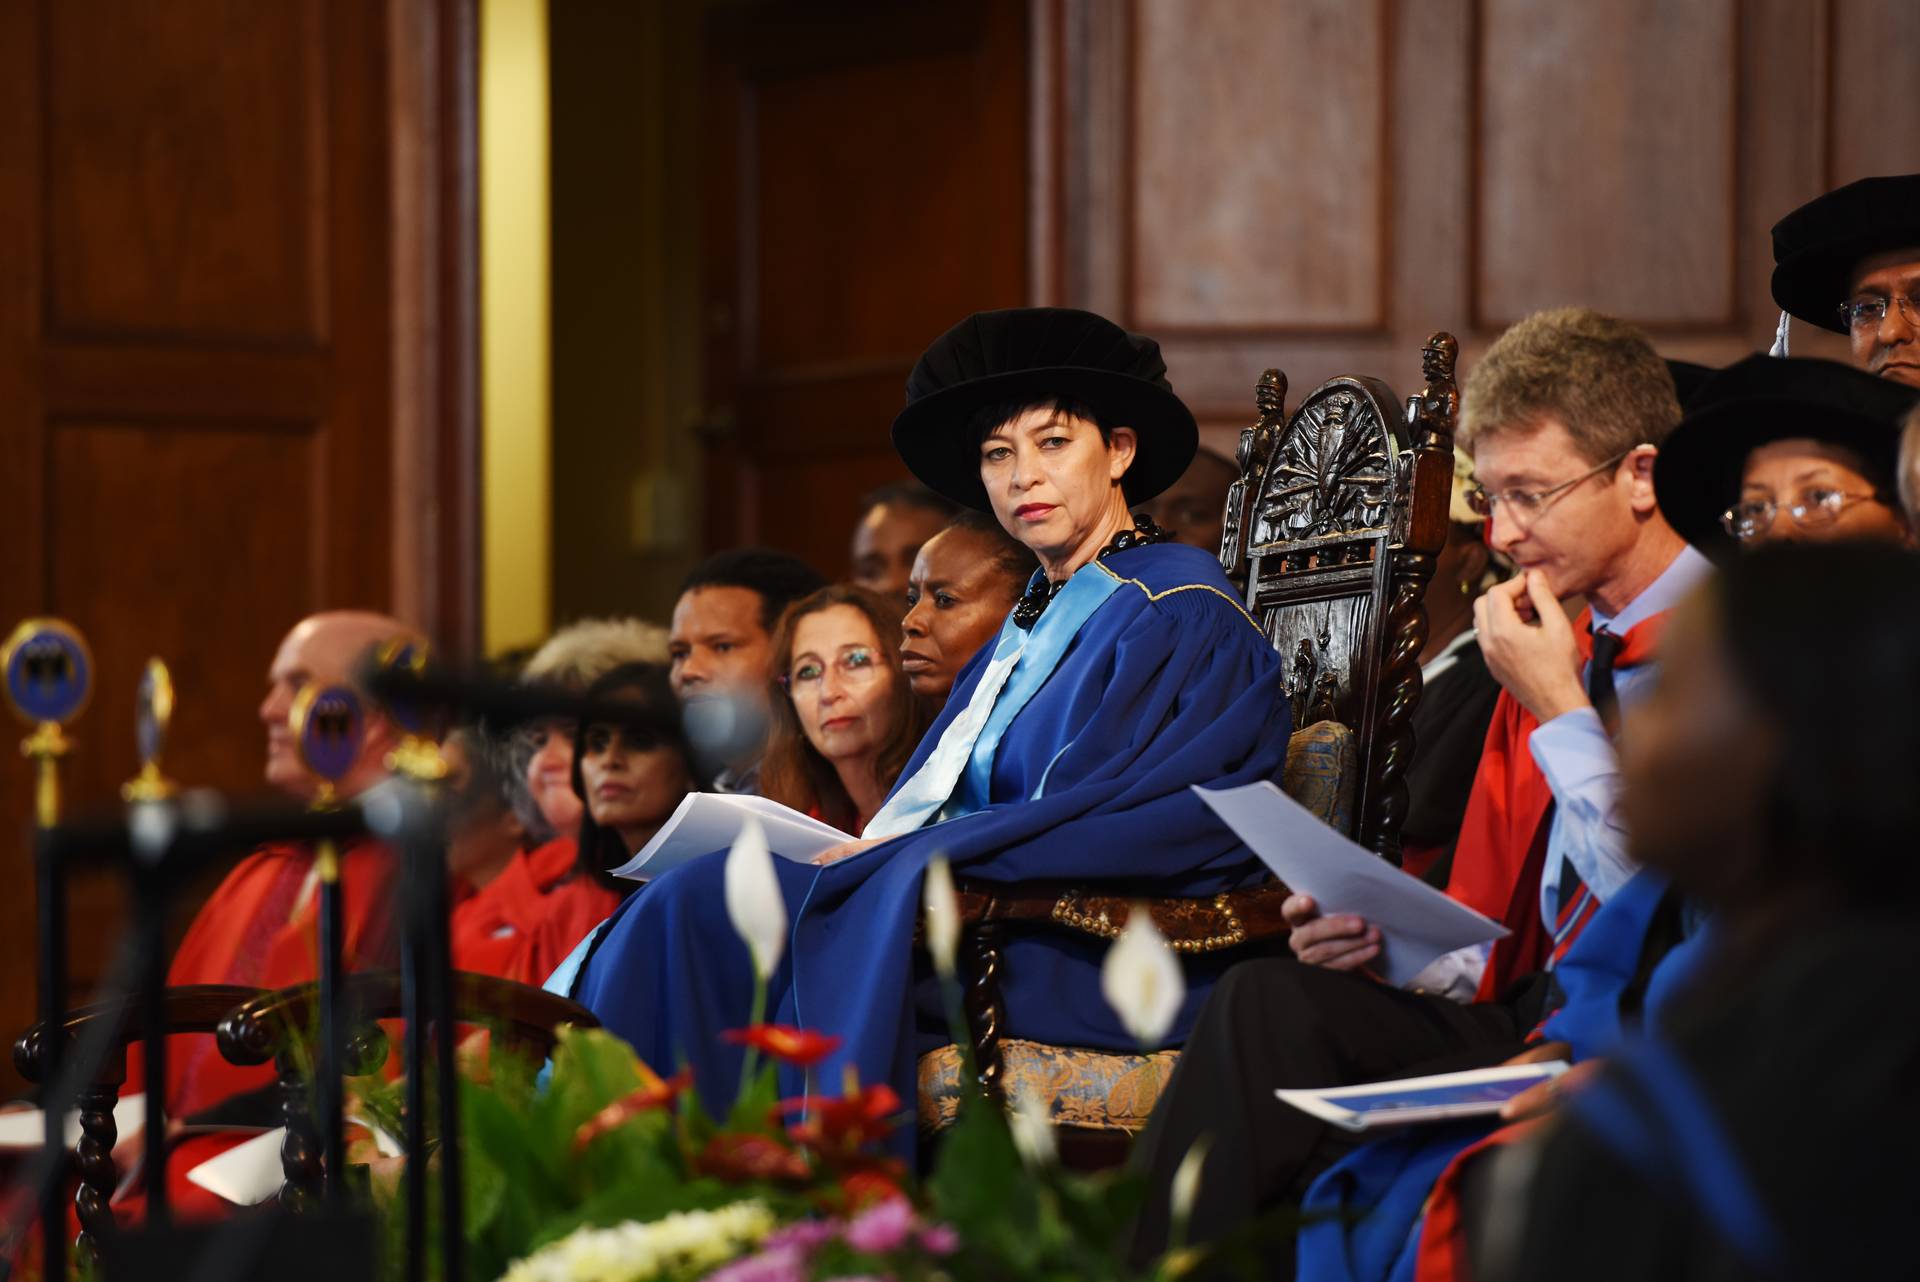 Deputy Vice-Chancellor, Professor Loretta Feris, was the Presiding Officer at several of the graduation ceremonies conferring degrees upon candidates.